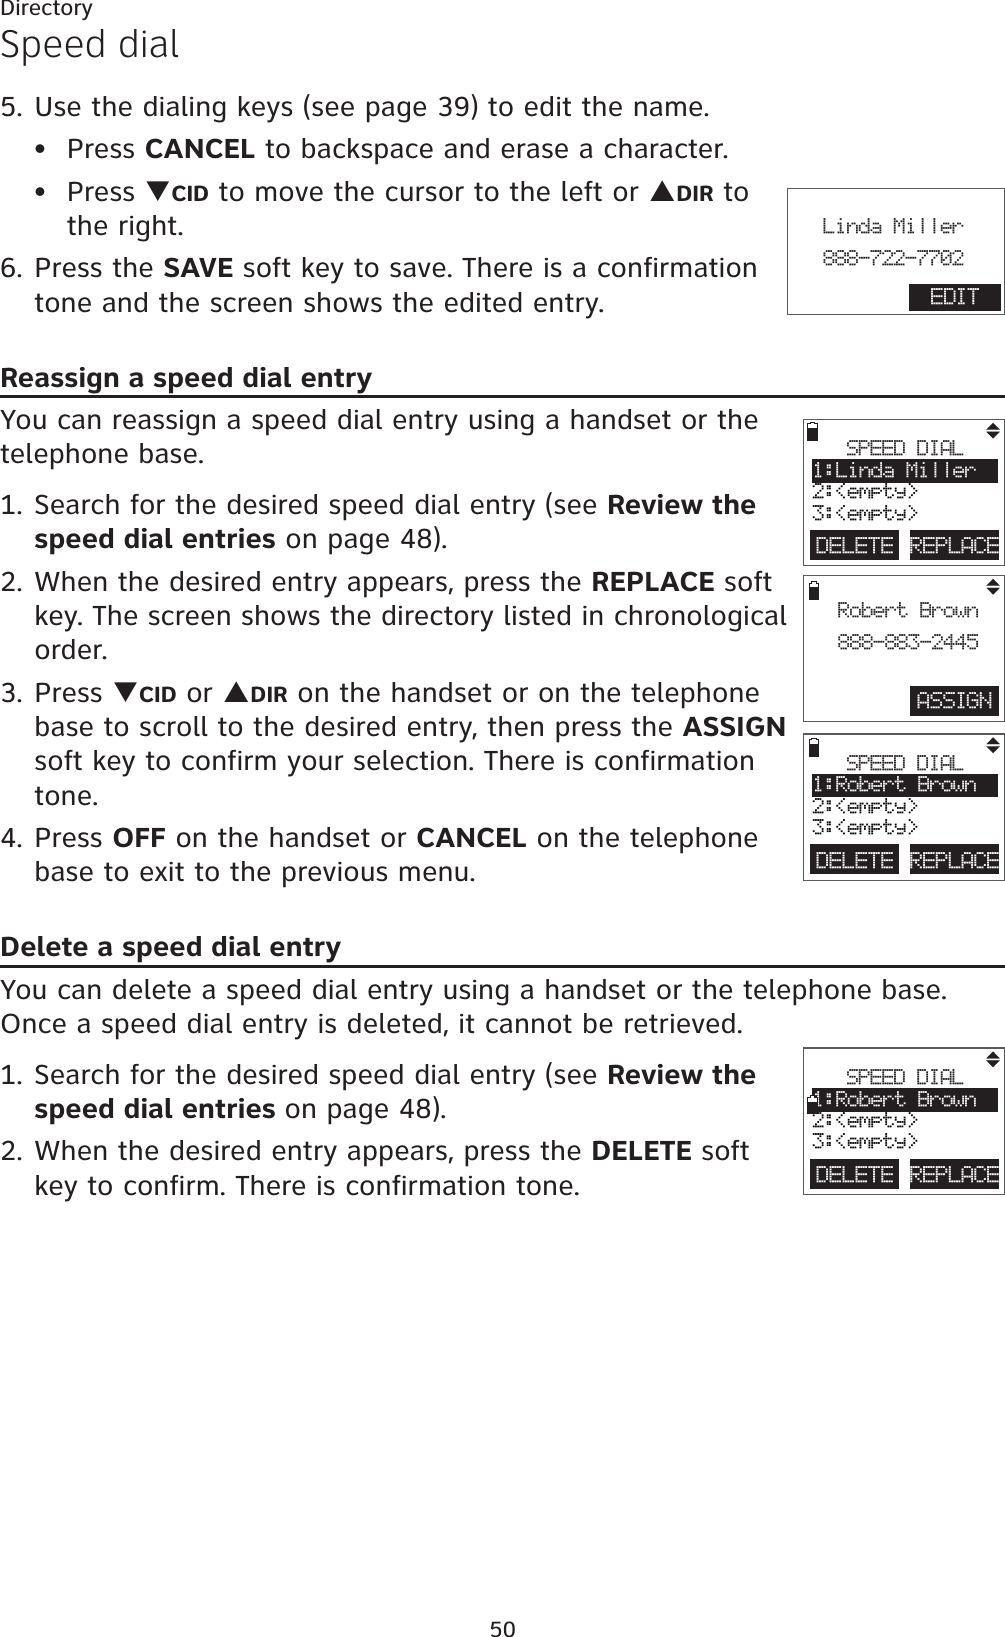 50DirectorySpeed dial5. Use the dialing keys (see page 39) to edit the name.Press CANCEL to backspace and erase a character.Press TCID to move the cursor to the left or SDIR to the right.6. Press the SAVE soft key to save. There is a confirmation tone and the screen shows the edited entry.Reassign a speed dial entryYou can reassign a speed dial entry using a handset or the telephone base.1. Search for the desired speed dial entry (see Review the speed dial entries on page 48).2. When the desired entry appears, press the REPLACE soft key. The screen shows the directory listed in chronological order.3. Press TCID or SDIR on the handset or on the telephone base to scroll to the desired entry, then press the ASSIGNsoft key to confirm your selection. There is confirmation tone.4. Press OFF on the handset or CANCEL on the telephone base to exit to the previous menu.Delete a speed dial entryYou can delete a speed dial entry using a handset or the telephone base. Once a speed dial entry is deleted, it cannot be retrieved.1. Search for the desired speed dial entry (see Review the speed dial entries on page 48).2. When the desired entry appears, press the DELETE soft key to confirm. There is confirmation tone. ••ASSIGNRobert Brown888-883-2445DELETE REPLACESPEED DIAL1:Linda Miller2:&lt;empty&gt;3:&lt;empty&gt;DELETE REPLACESPEED DIAL1:Robert Brown2:&lt;empty&gt;3:&lt;empty&gt;DELETE REPLACESPEED DIAL1:Robert Brown2:&lt;empty&gt;3:&lt;empty&gt;                       Linda Miller888-722-7702EDIT